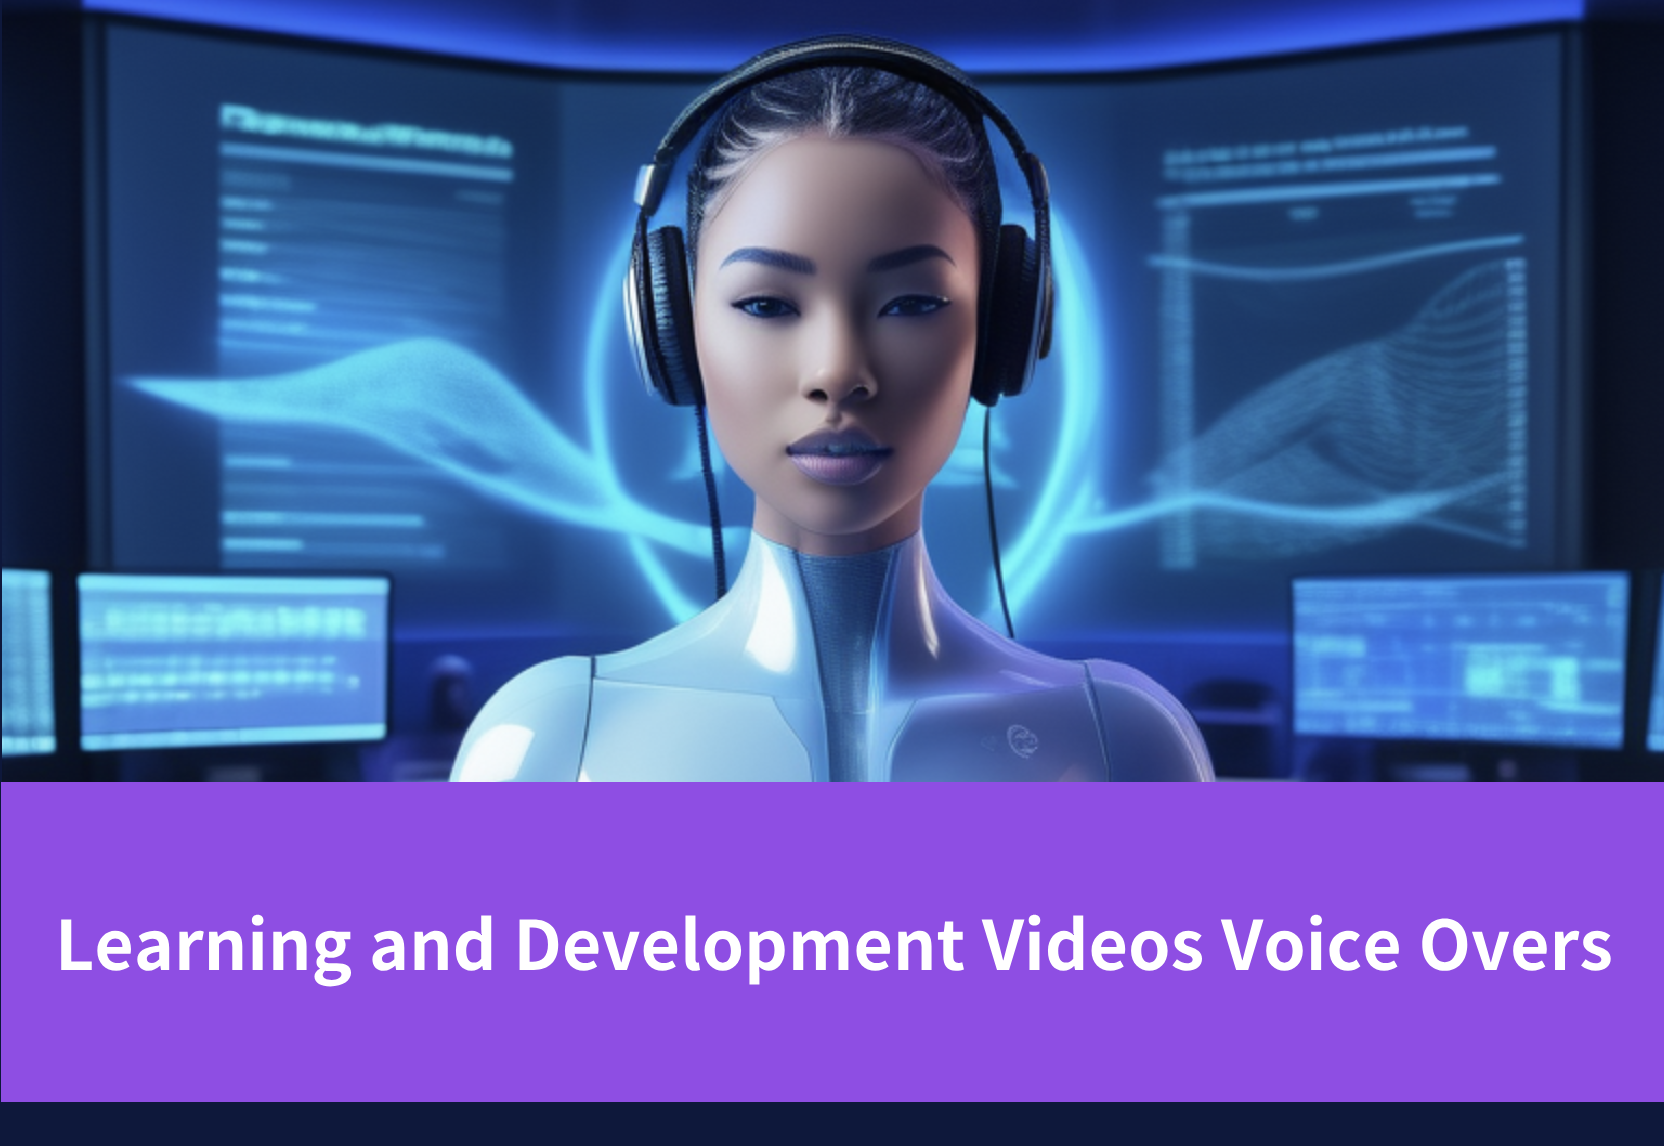 How To Create Learning and Development Videos Using AI Voiceovers?